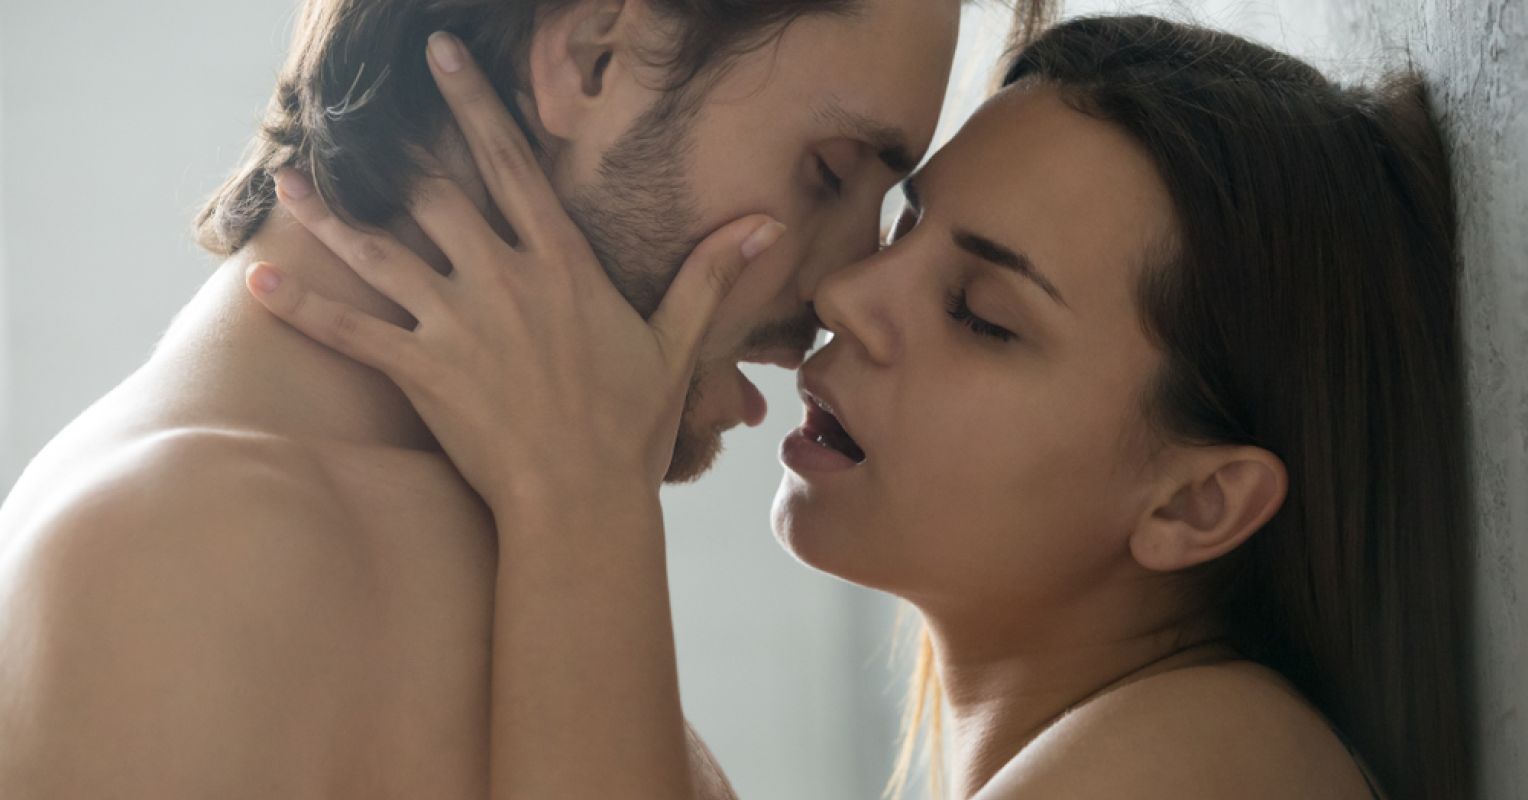 Why We Scream and Moan During Sex | Psychology Today